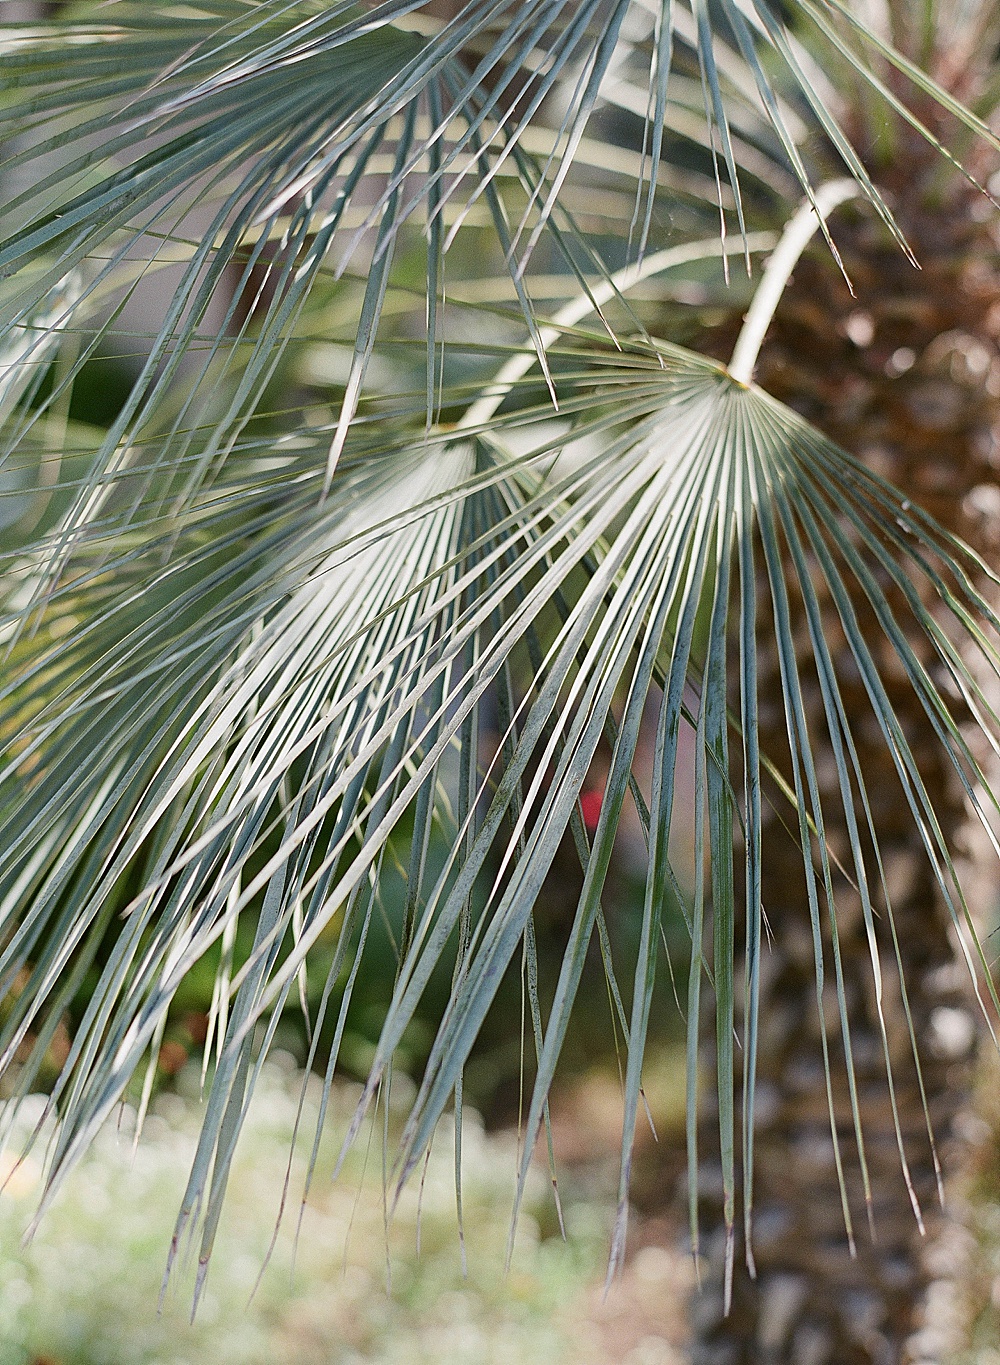 Palm fronds in Balboa Park